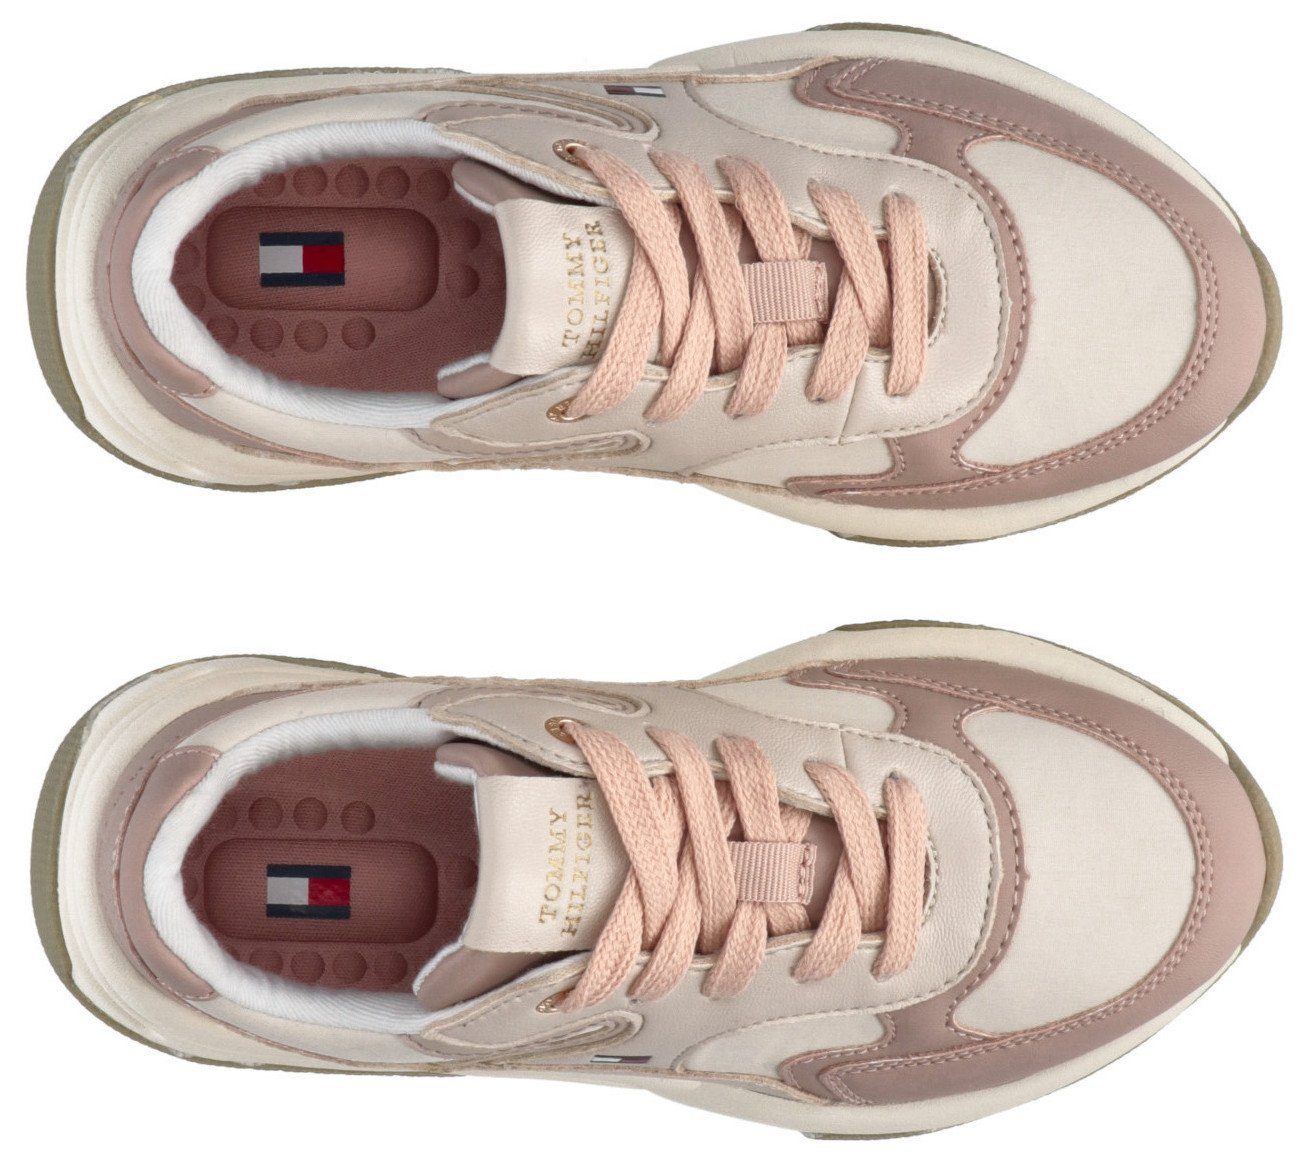 Tommy Hilfiger LACE-UP modischer CUT Plateausneaker mit Chunky SNEAKER Sohle LOW